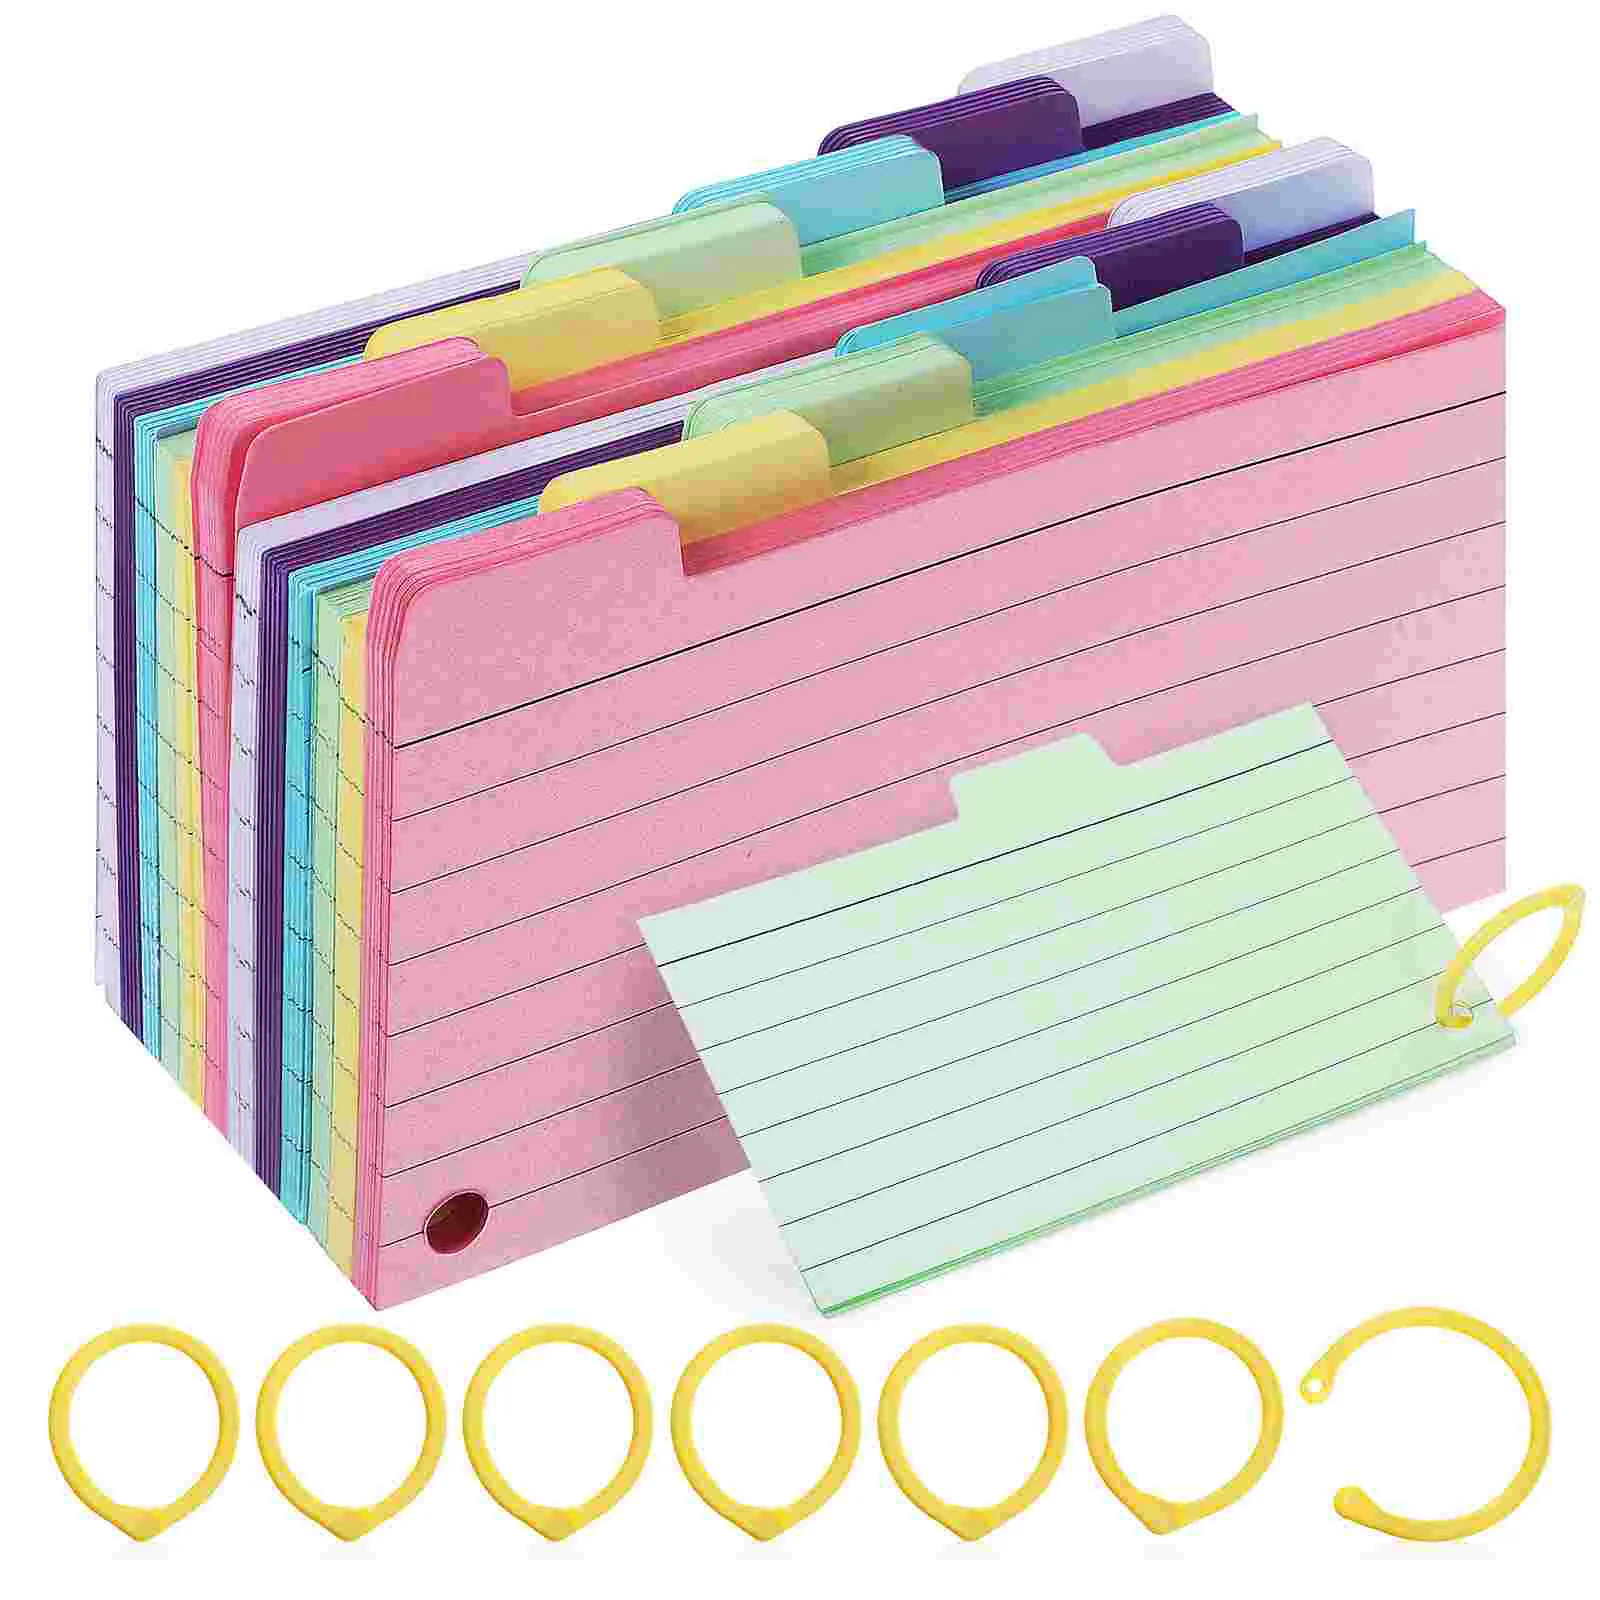 

450 Pcs Notebook Flash Cards Studying Taking Pads Student Office Notepad Lined Notepads Paper Small Memo Fridge